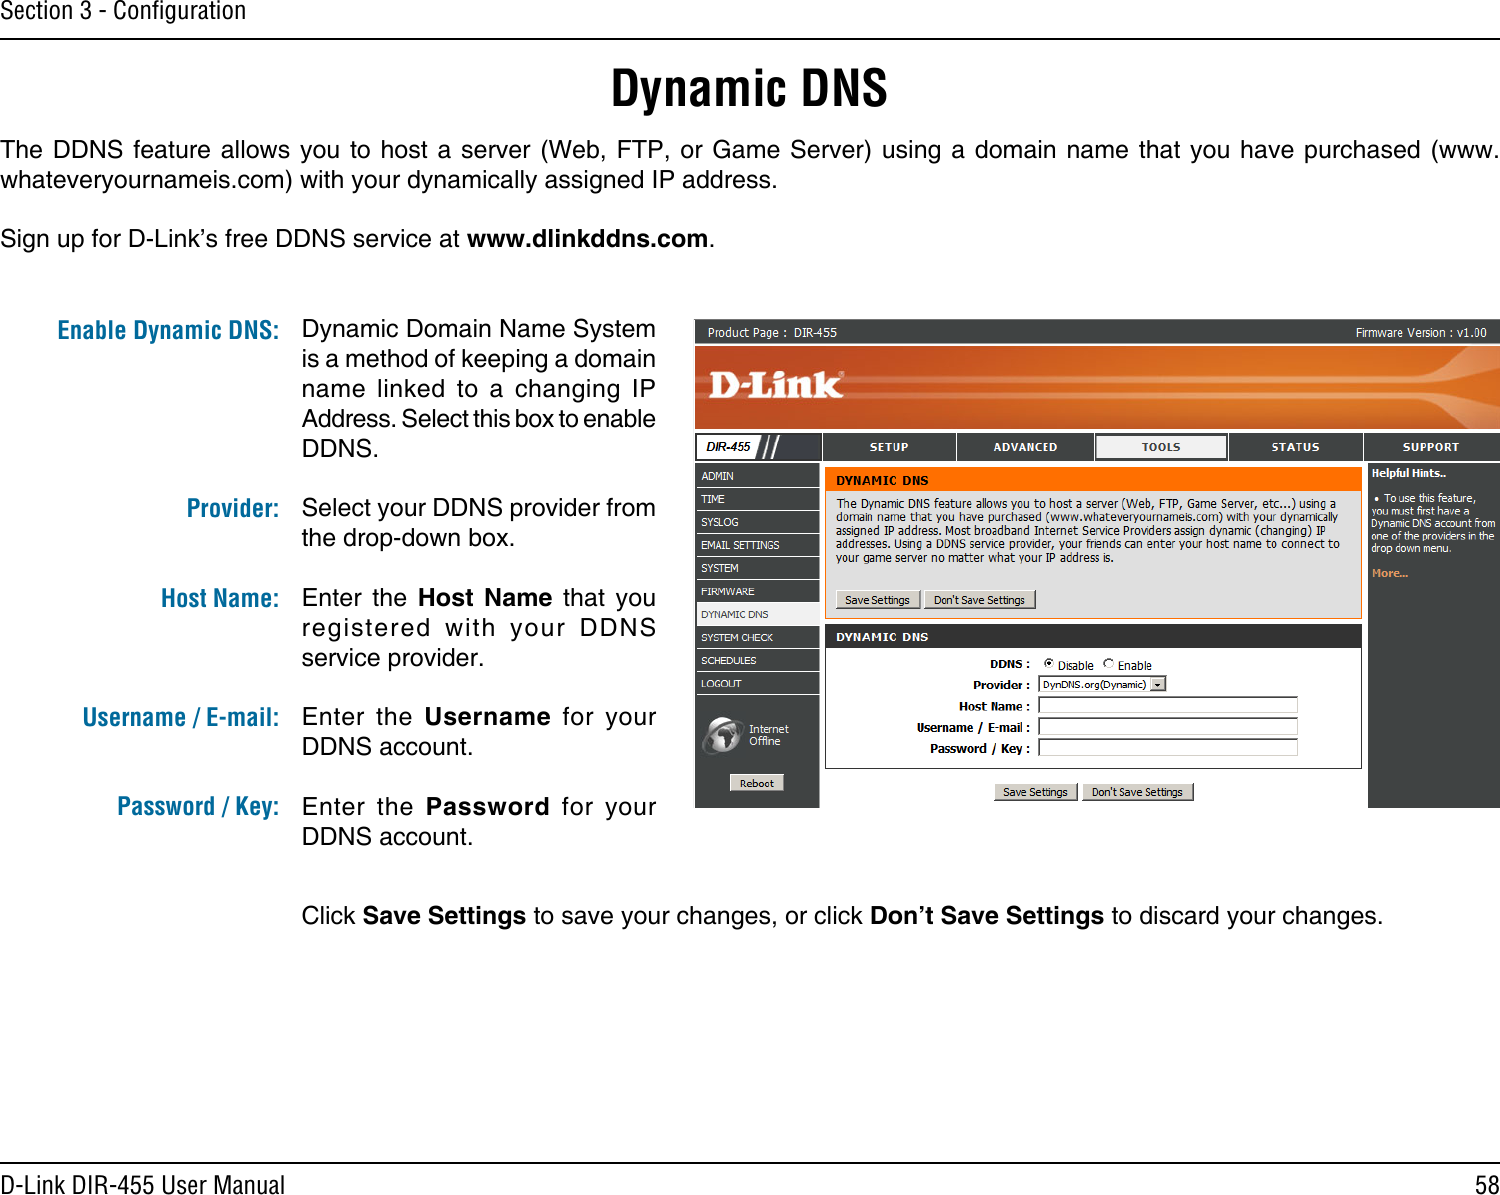 58D-Link DIR-455 User ManualSection 3 - ConﬁgurationDynamic DNSDynamic Domain Name System is a method of keeping a domain name  linked  to  a  changing  IP Address. Select this box to enable DDNS.Select your DDNS provider from the drop-down box.Enter  the  Host  Name  that  you registered  with  your  DDNS service provider.Enter  the  Username  for  your DDNS account.Enter  the  Password  for  your DDNS account.The DDNS feature  allows  you to host a  server  (Web, FTP, or Game  Server)  using a domain name  that  you have purchased (www.whateveryournameis.com) with your dynamically assigned IP address.Sign up for D-Link’s free DDNS service at www.dlinkddns.com.Enable Dynamic DNS:Provider: Host Name:Username / E-mail: Password / Key:Click Save Settings to save your changes, or click Don’t Save Settings to discard your changes.